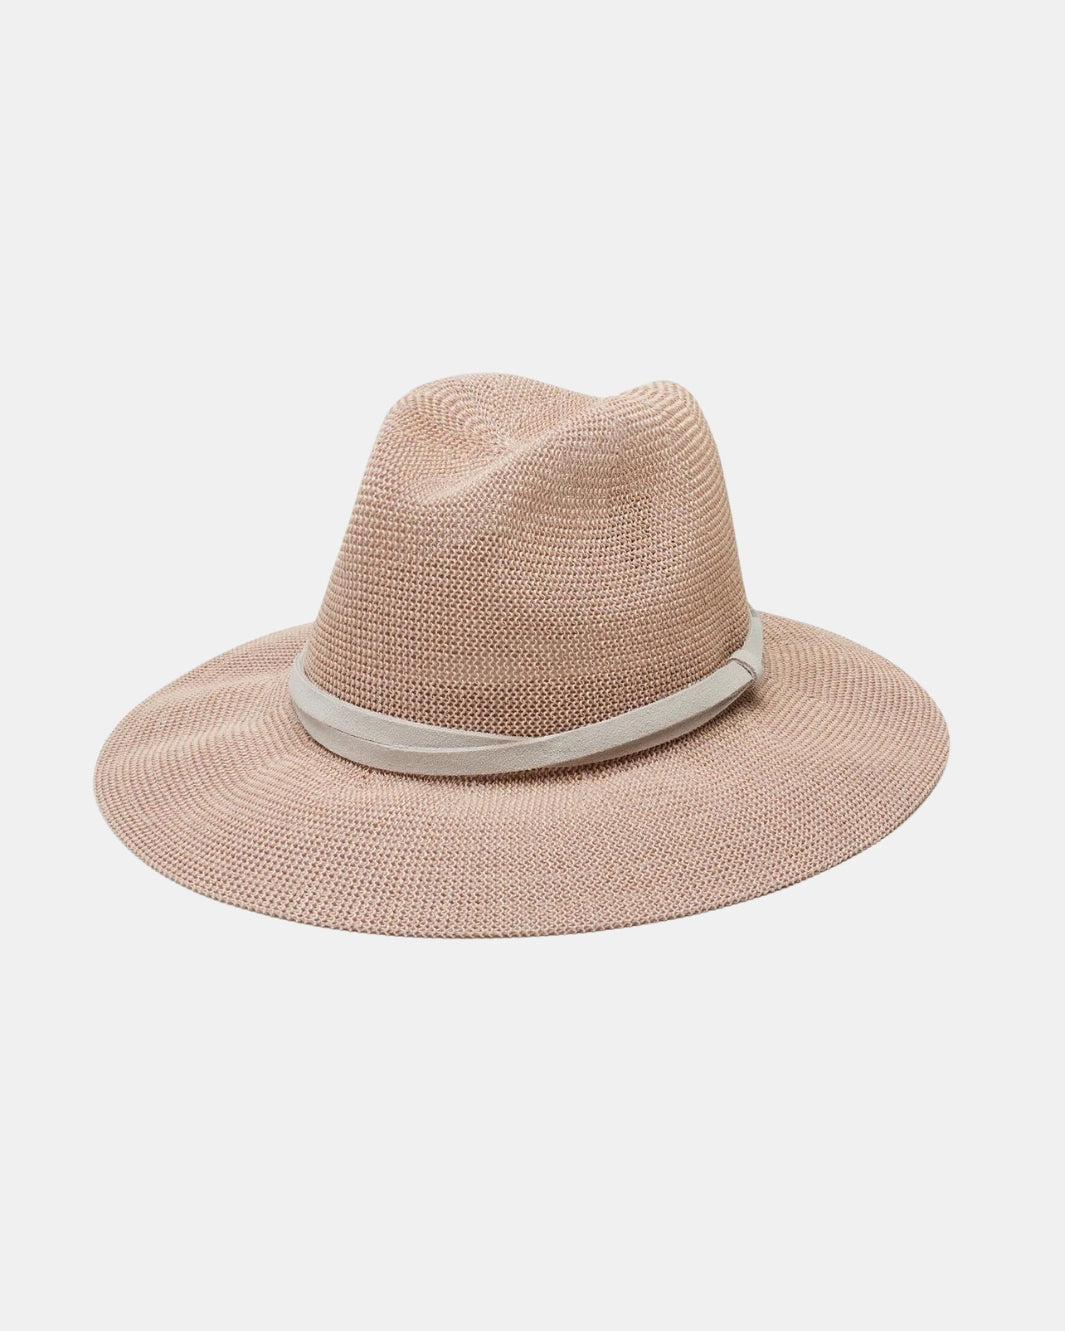 SEDONA HAT IN PINK - Romi Boutique